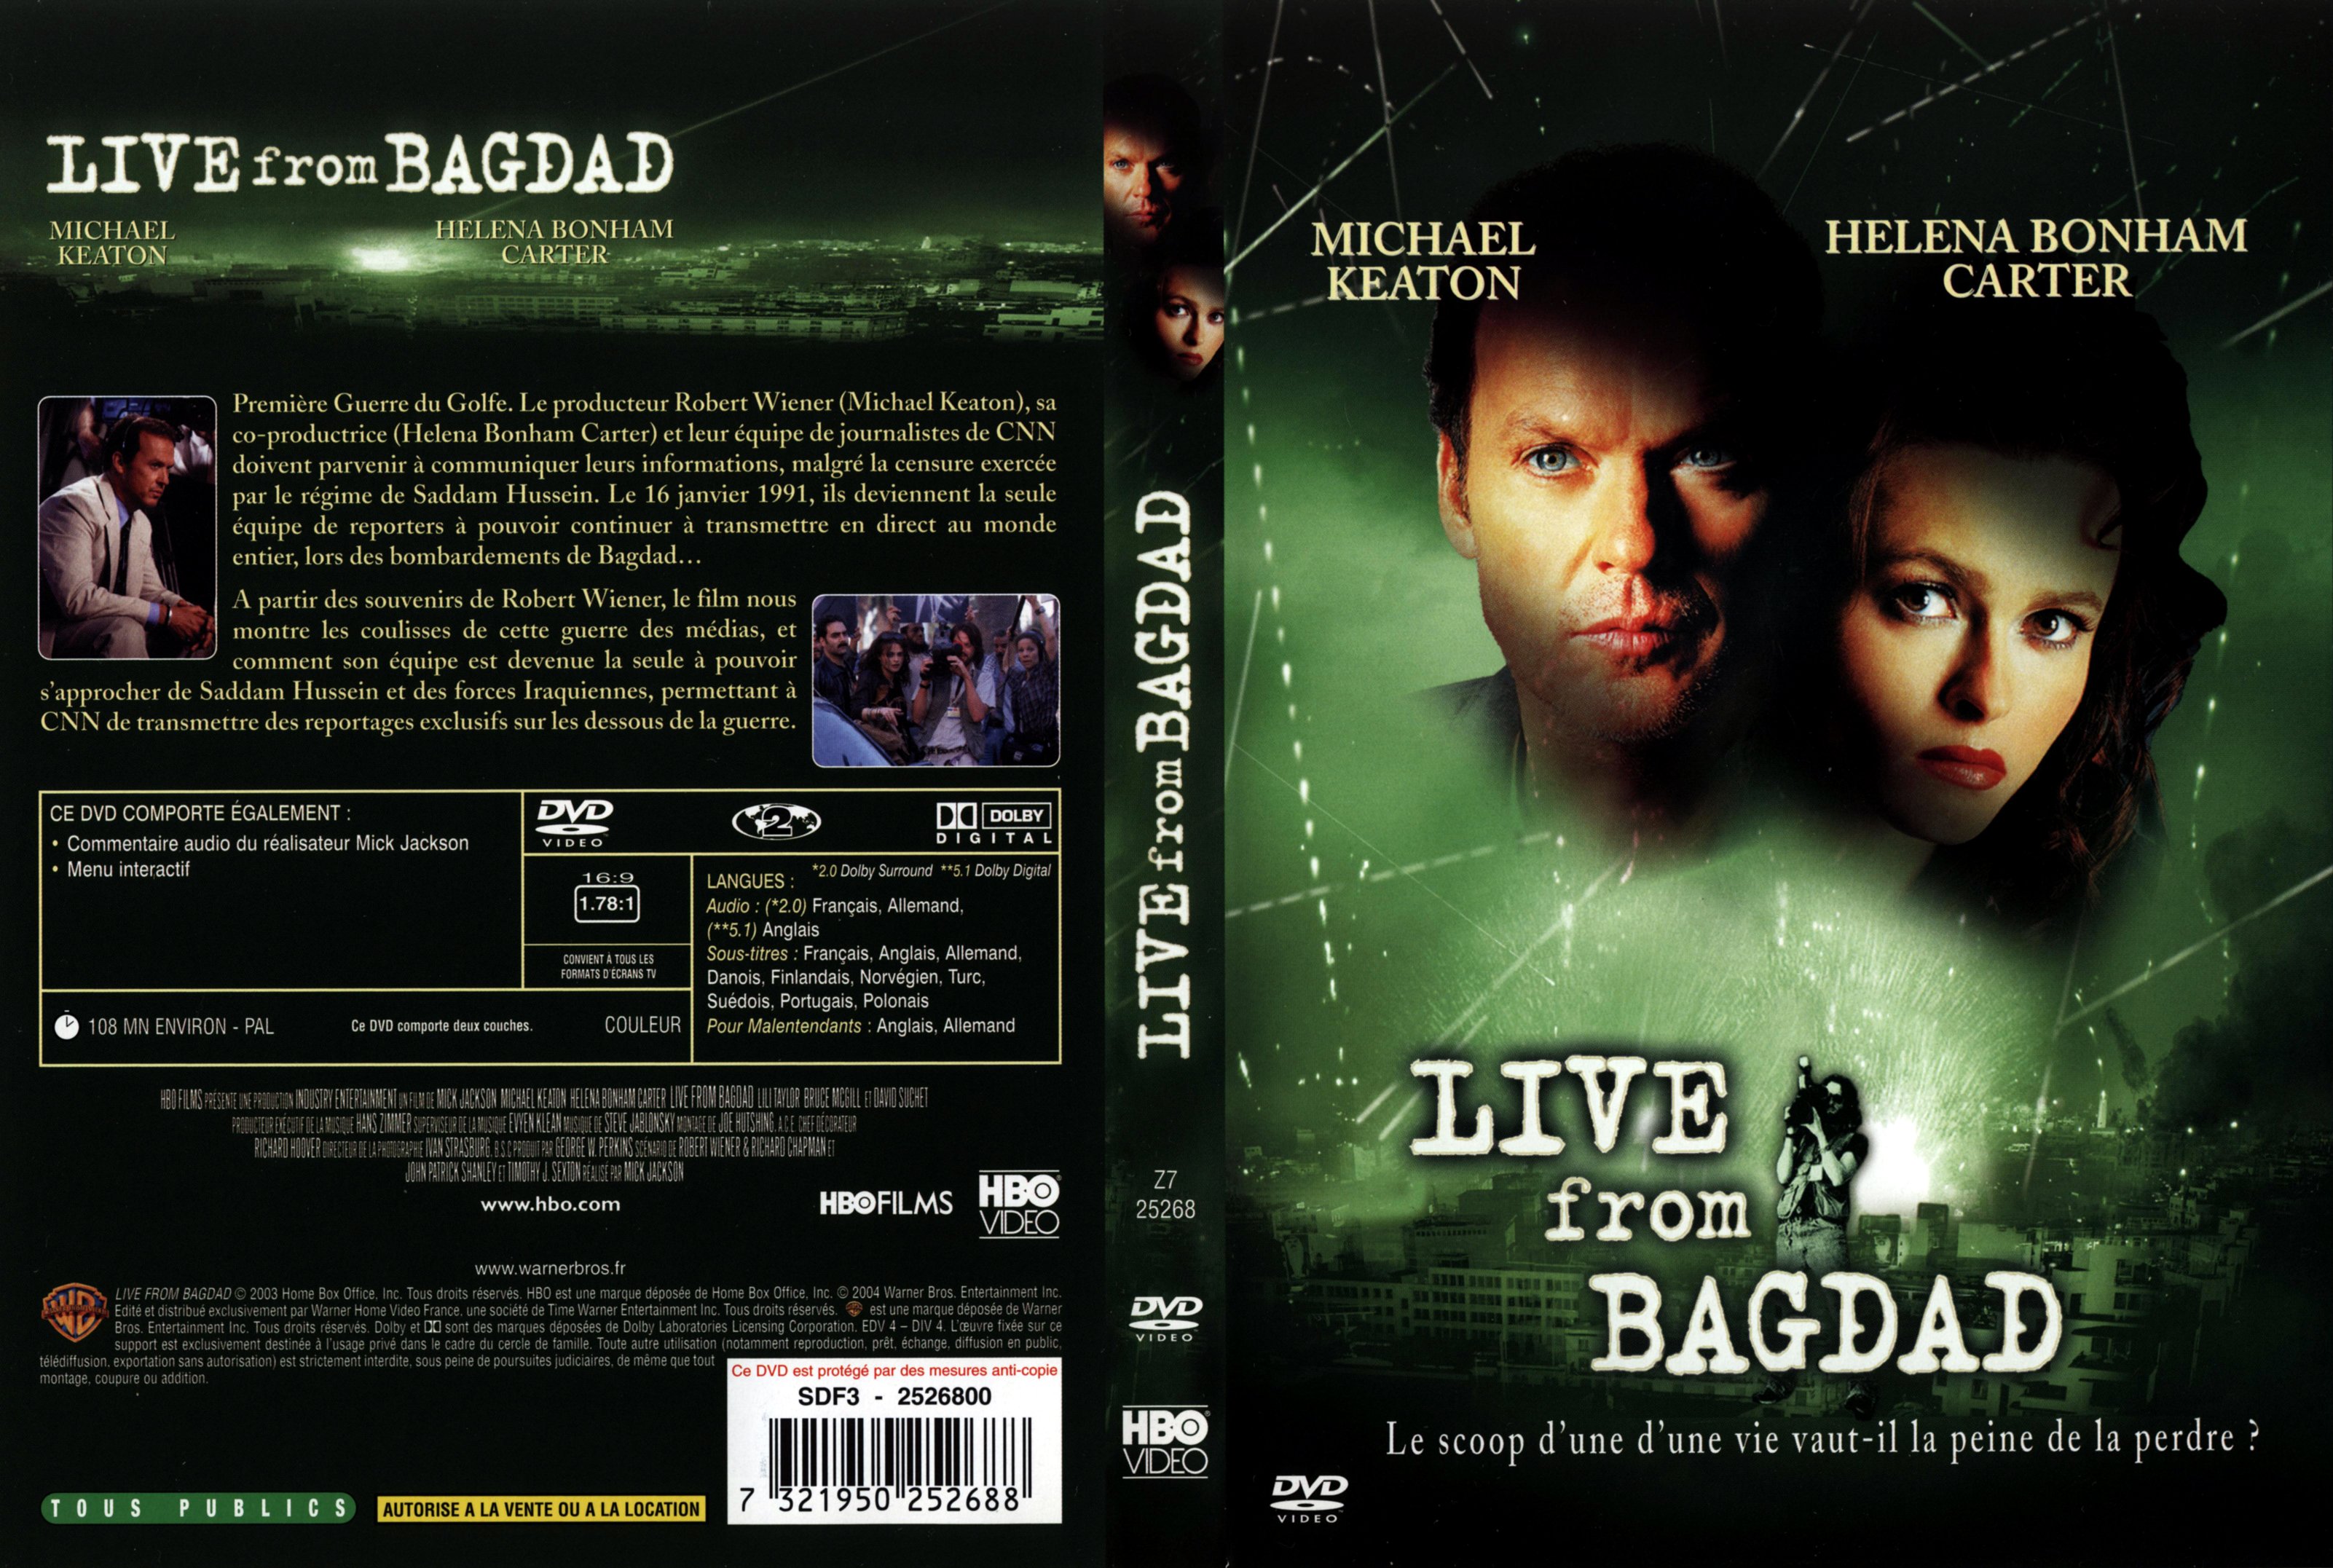 Jaquette DVD Live from Bagdad